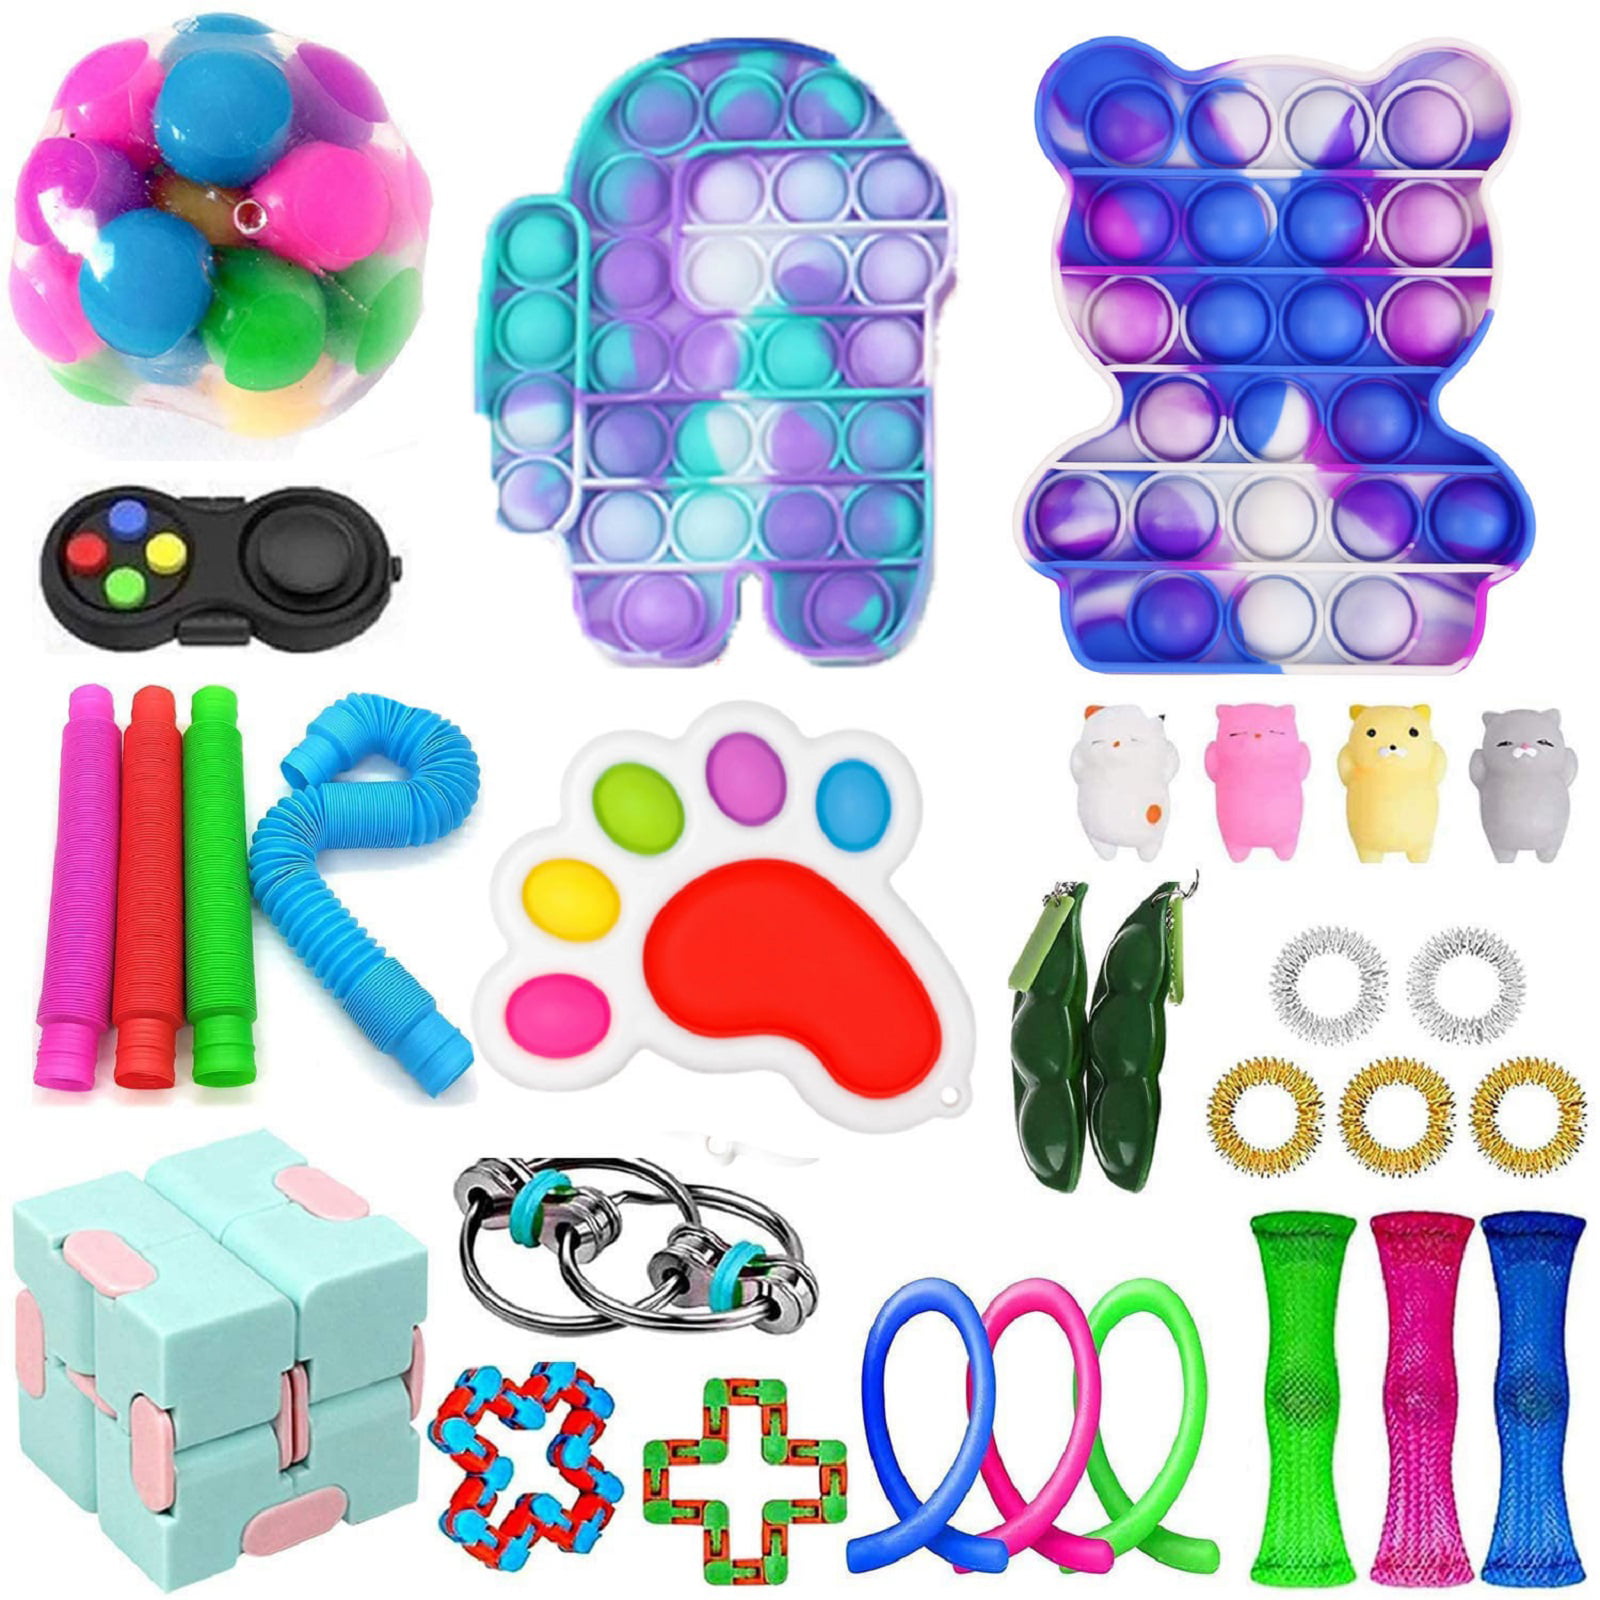 Details about   22 Pack Fidget Sensory Pop Toy Set Stress Relief Autism Anxiety Relief Stress 